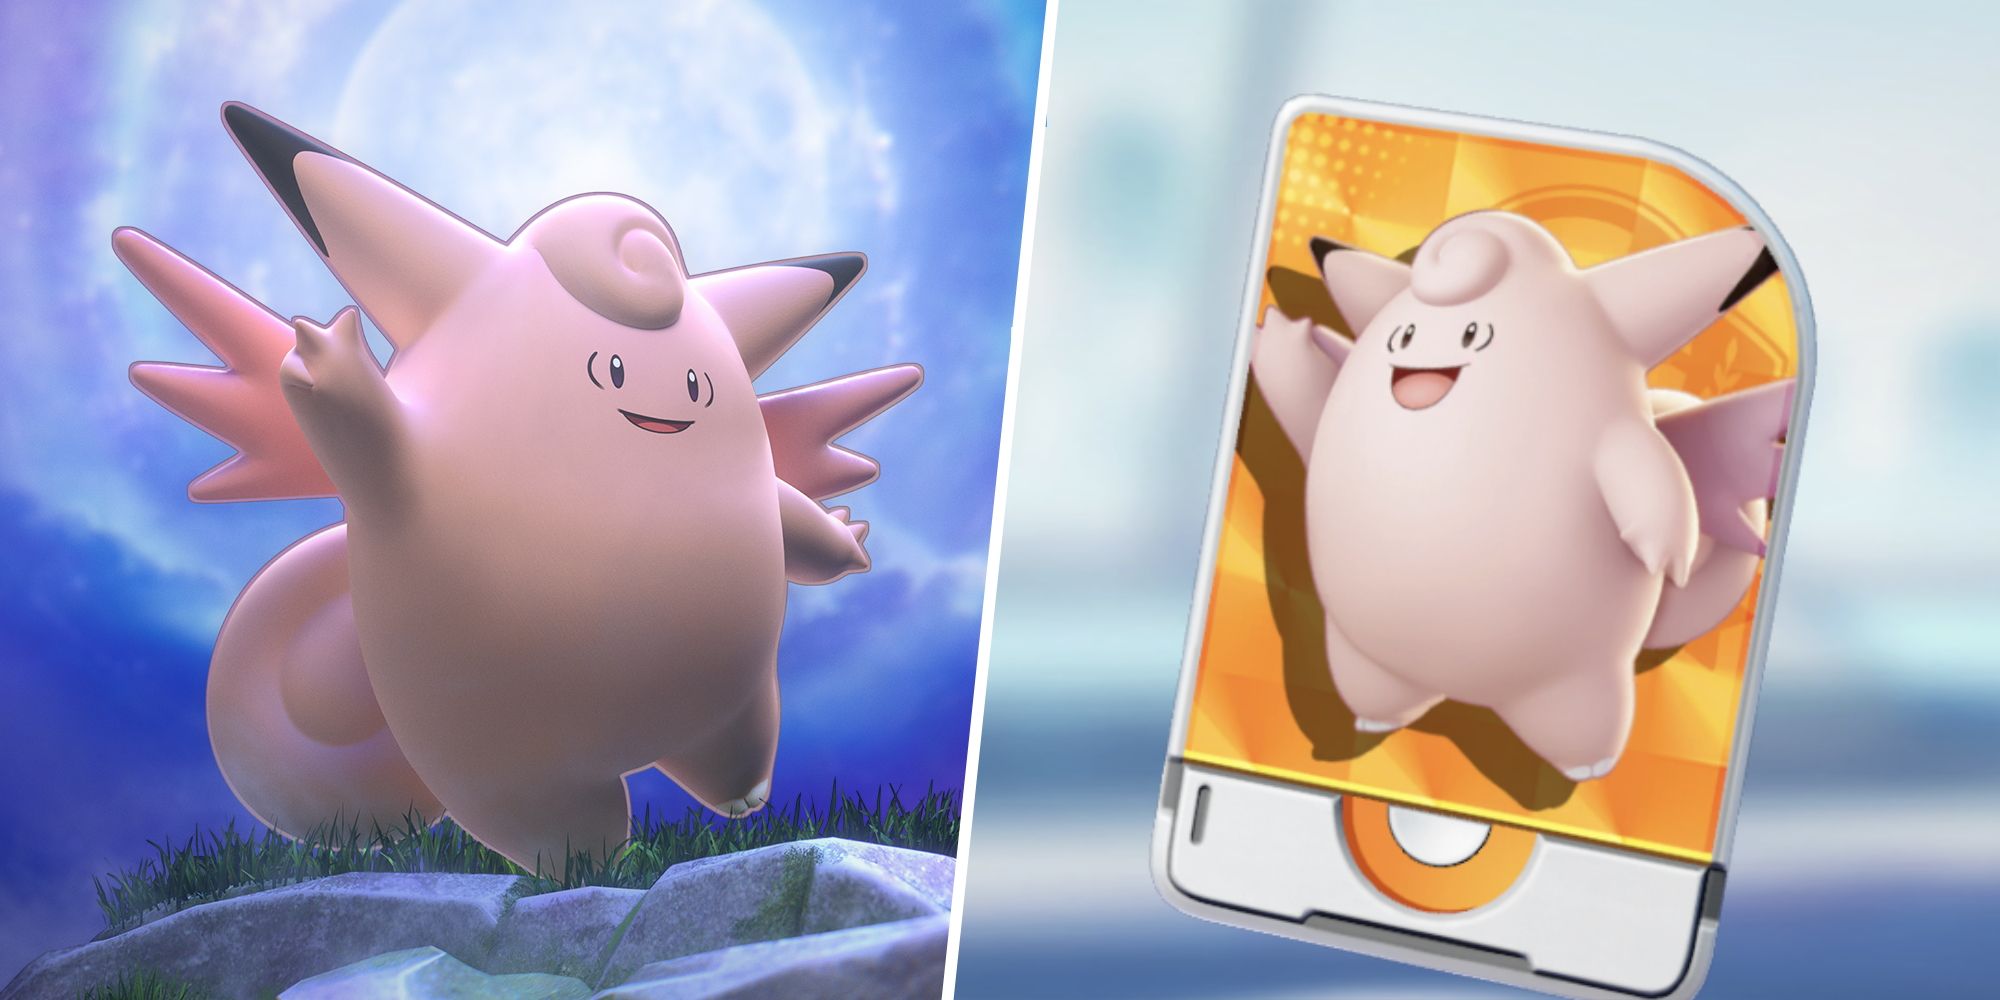 Clefable in the moonlight on the left with the Clefable Unite License from Pokemon Unite on the right.